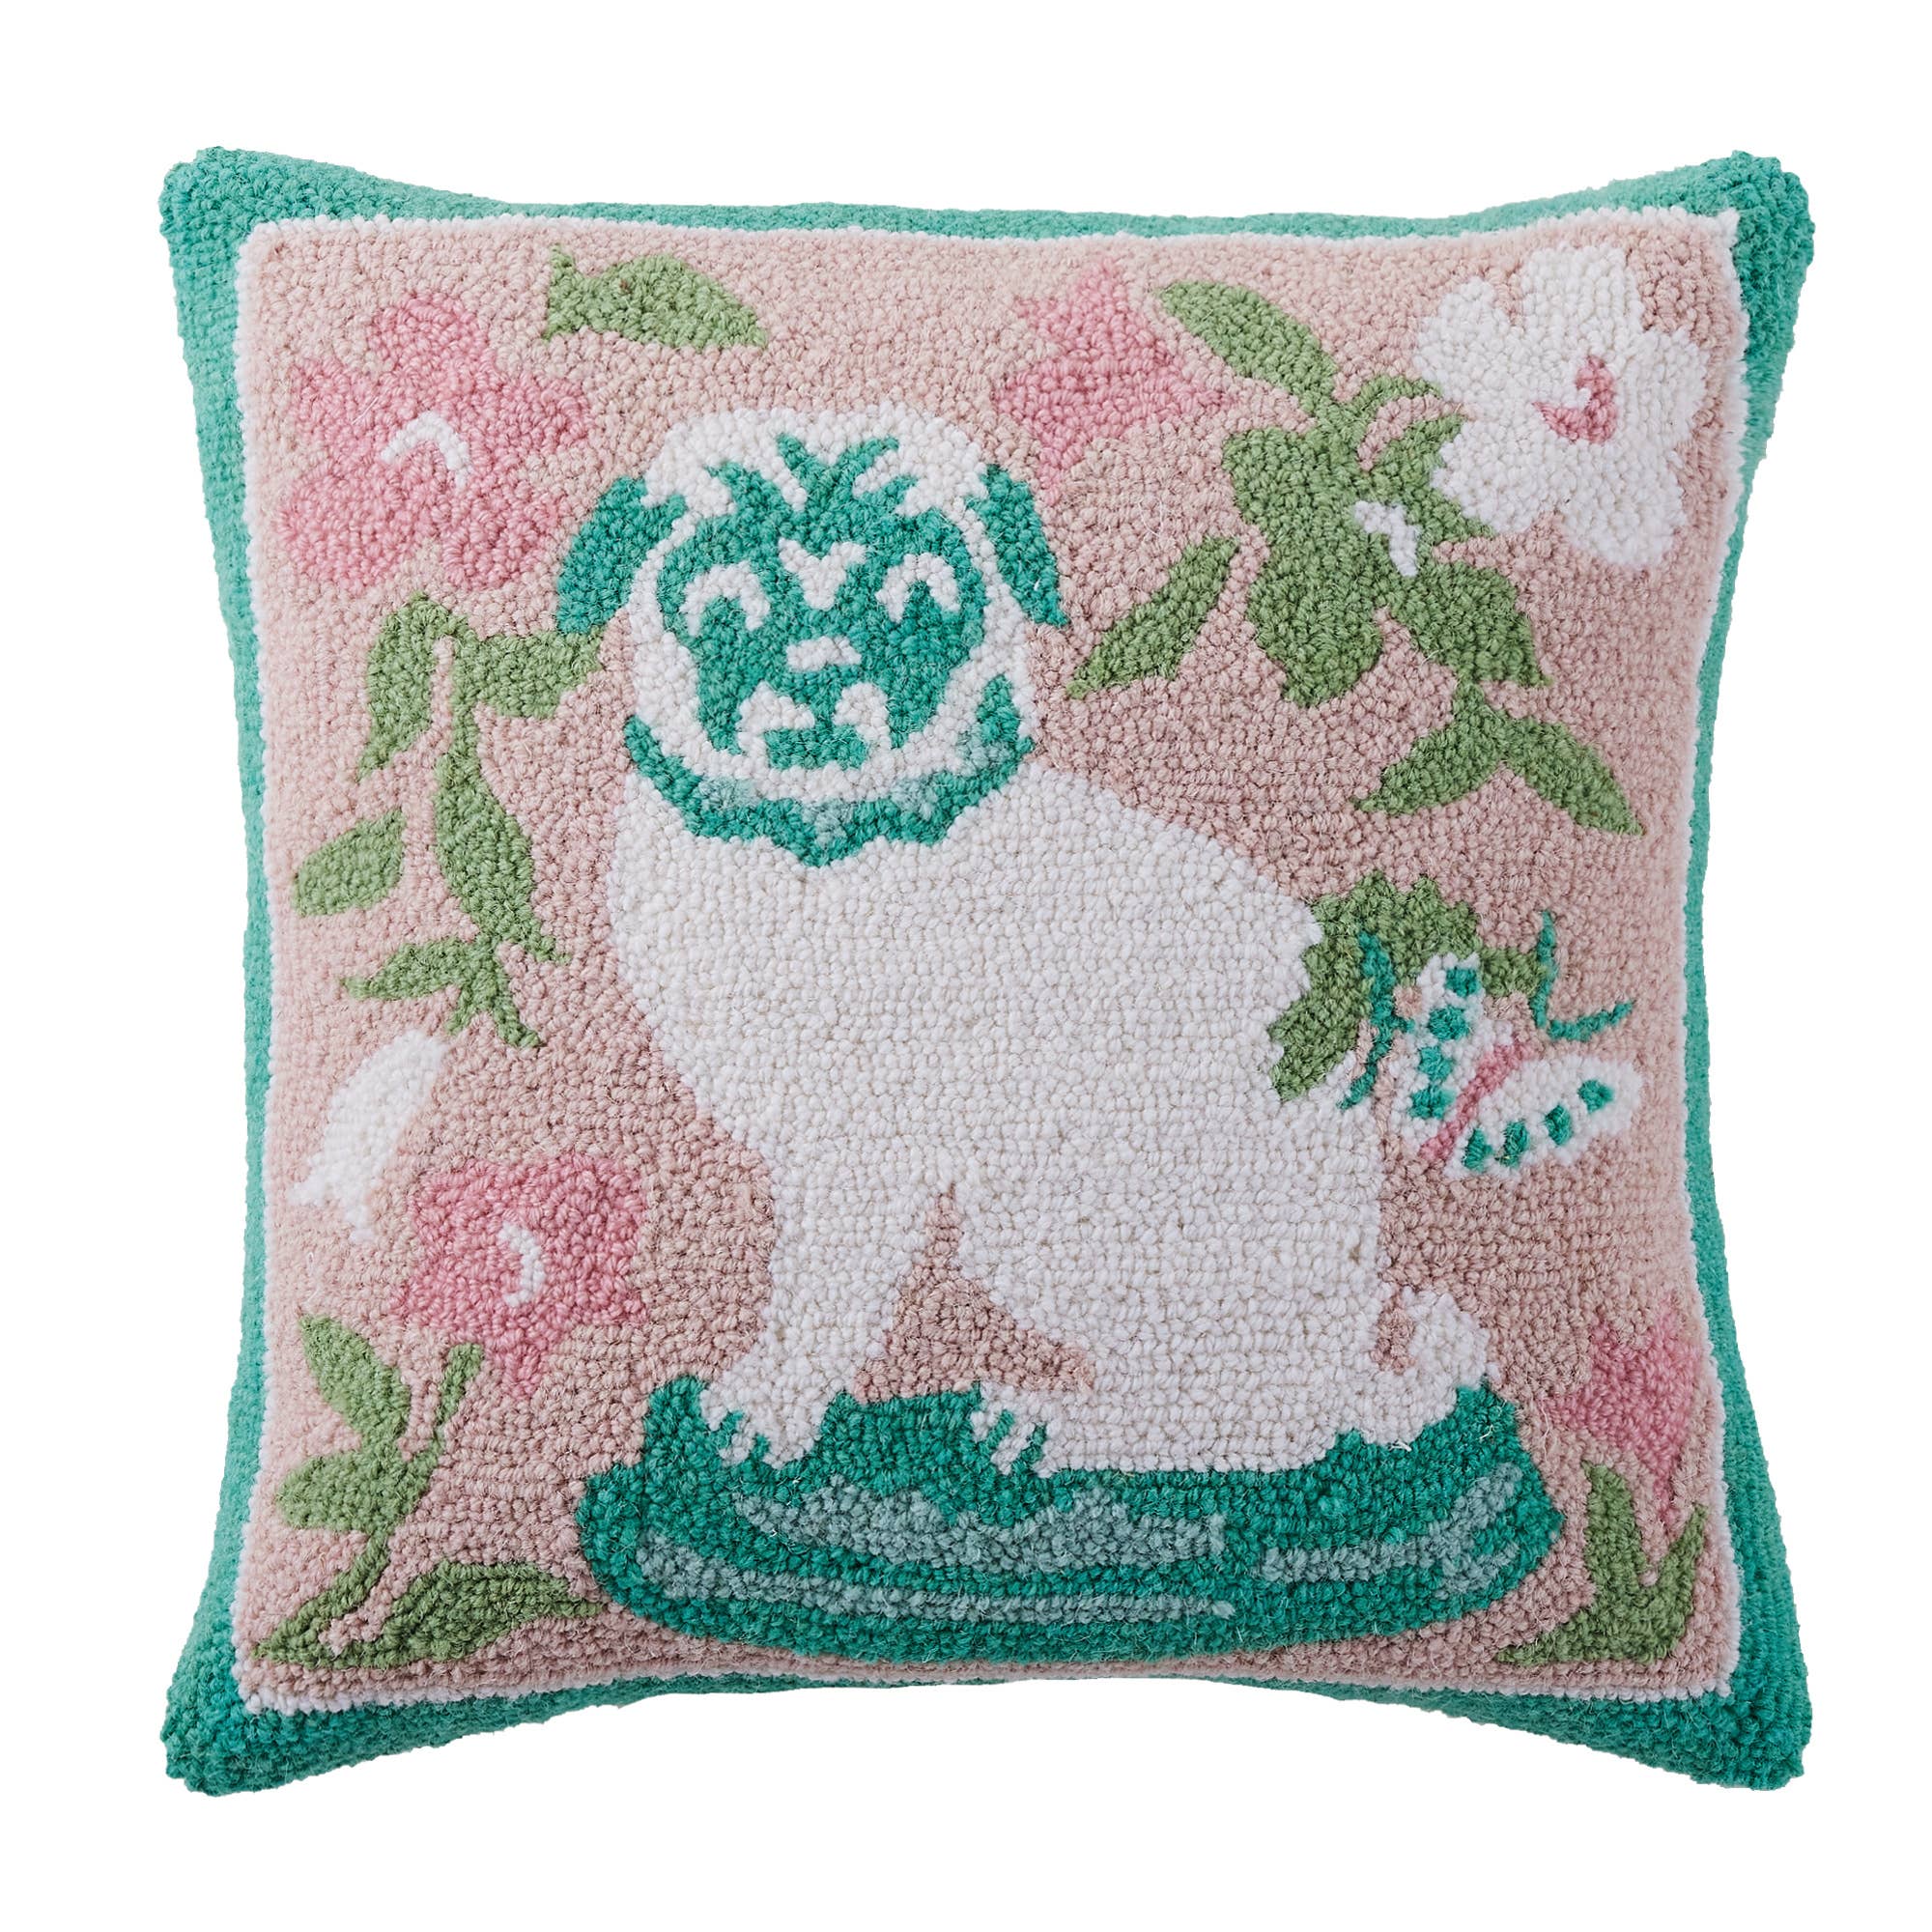 Imperial Palace Pink Hook Pillow - The Preppy Bunny